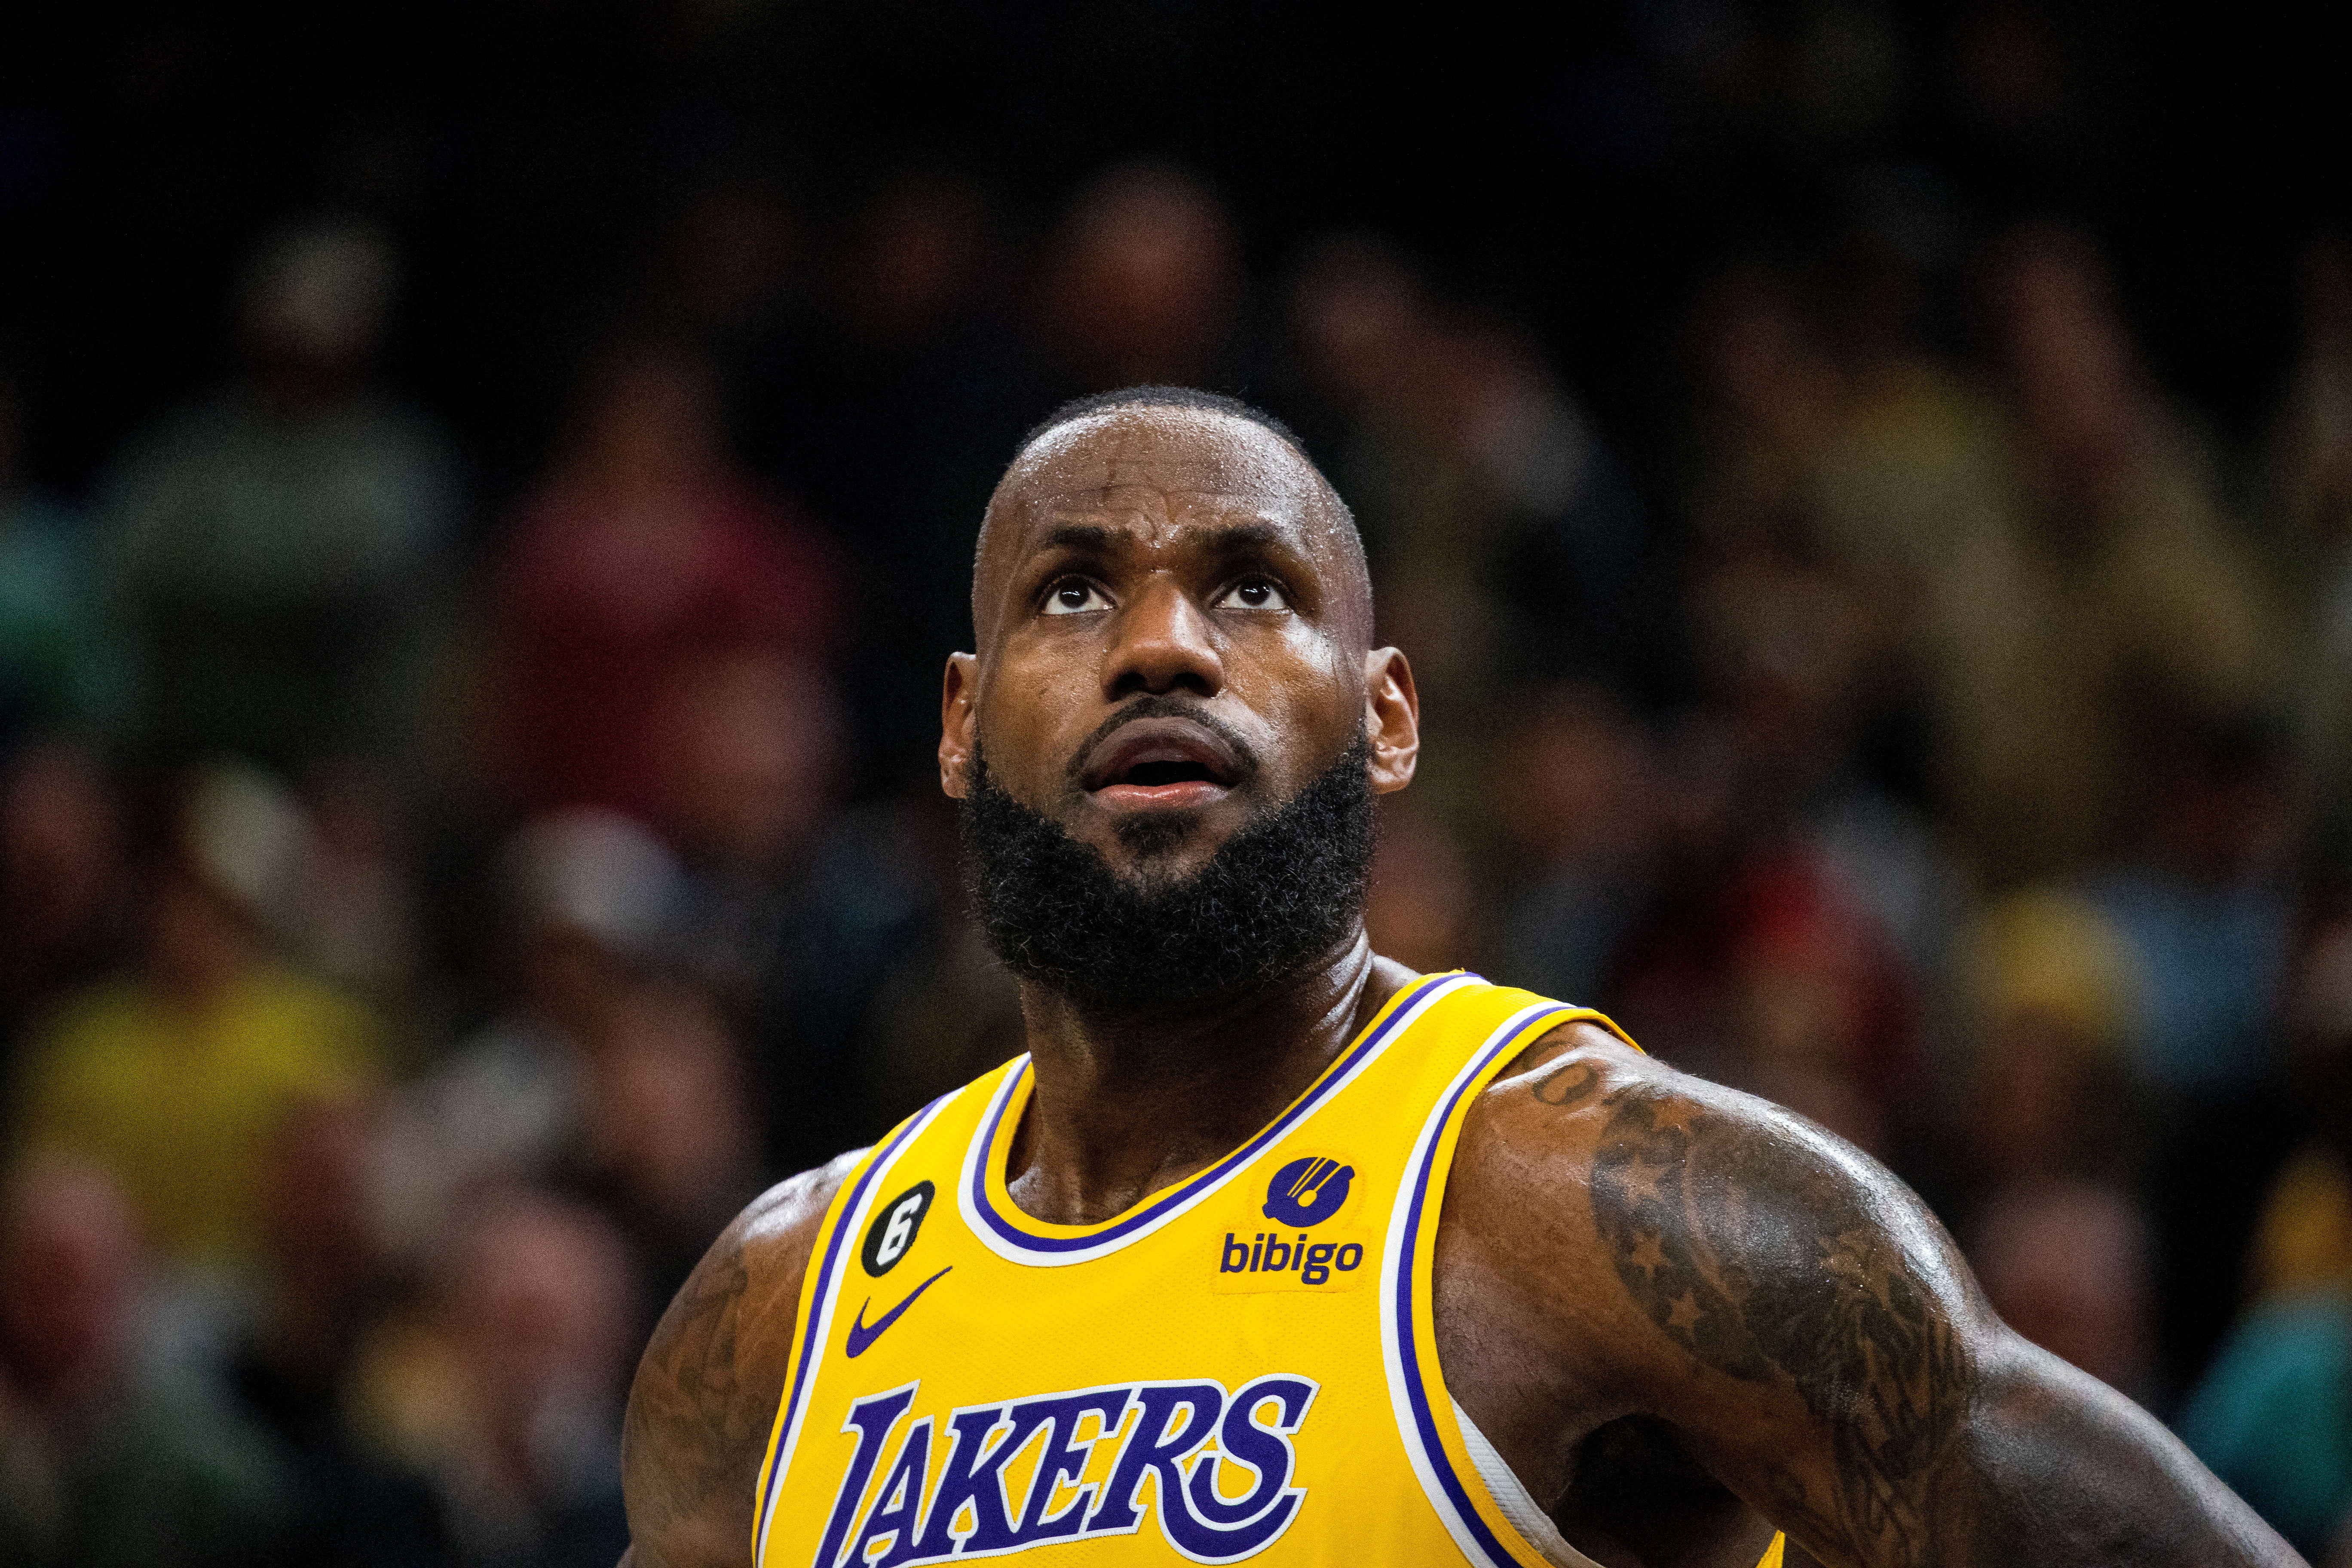 10 milestones within reach for LeBron James as Lakers star returns